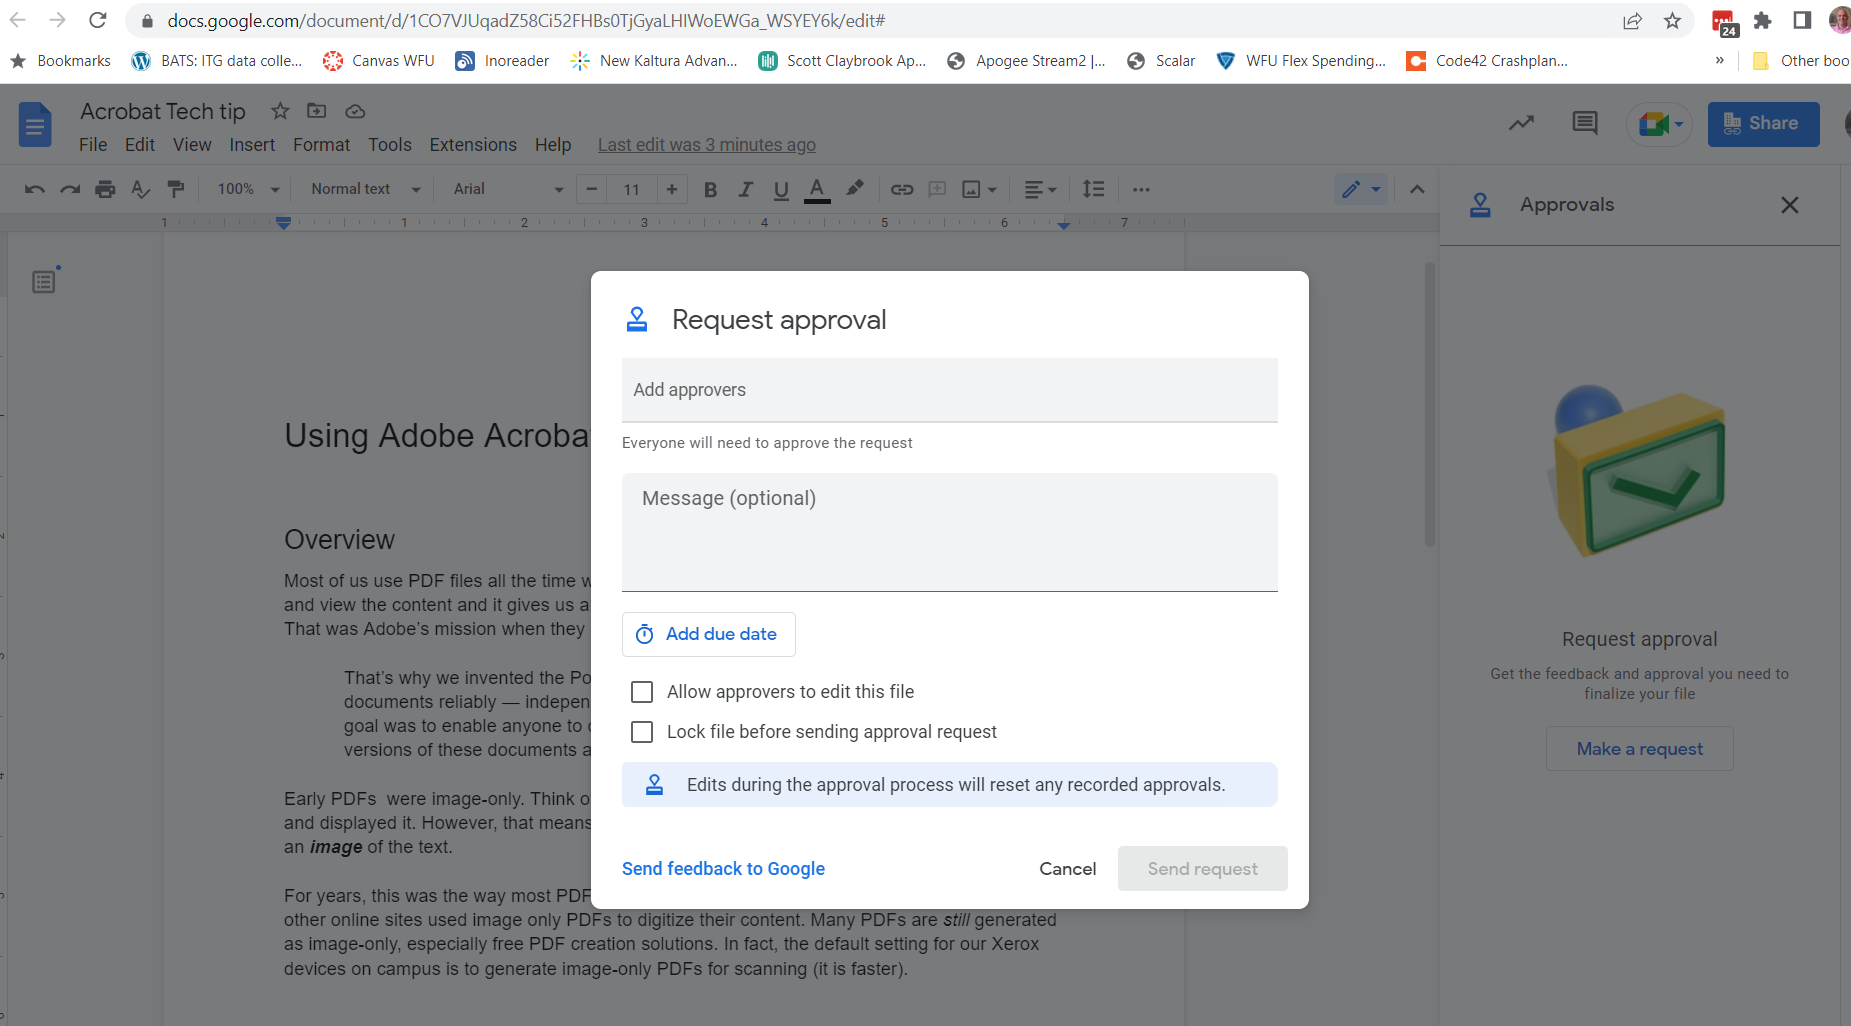 Screencapture of the Request approval dialog box